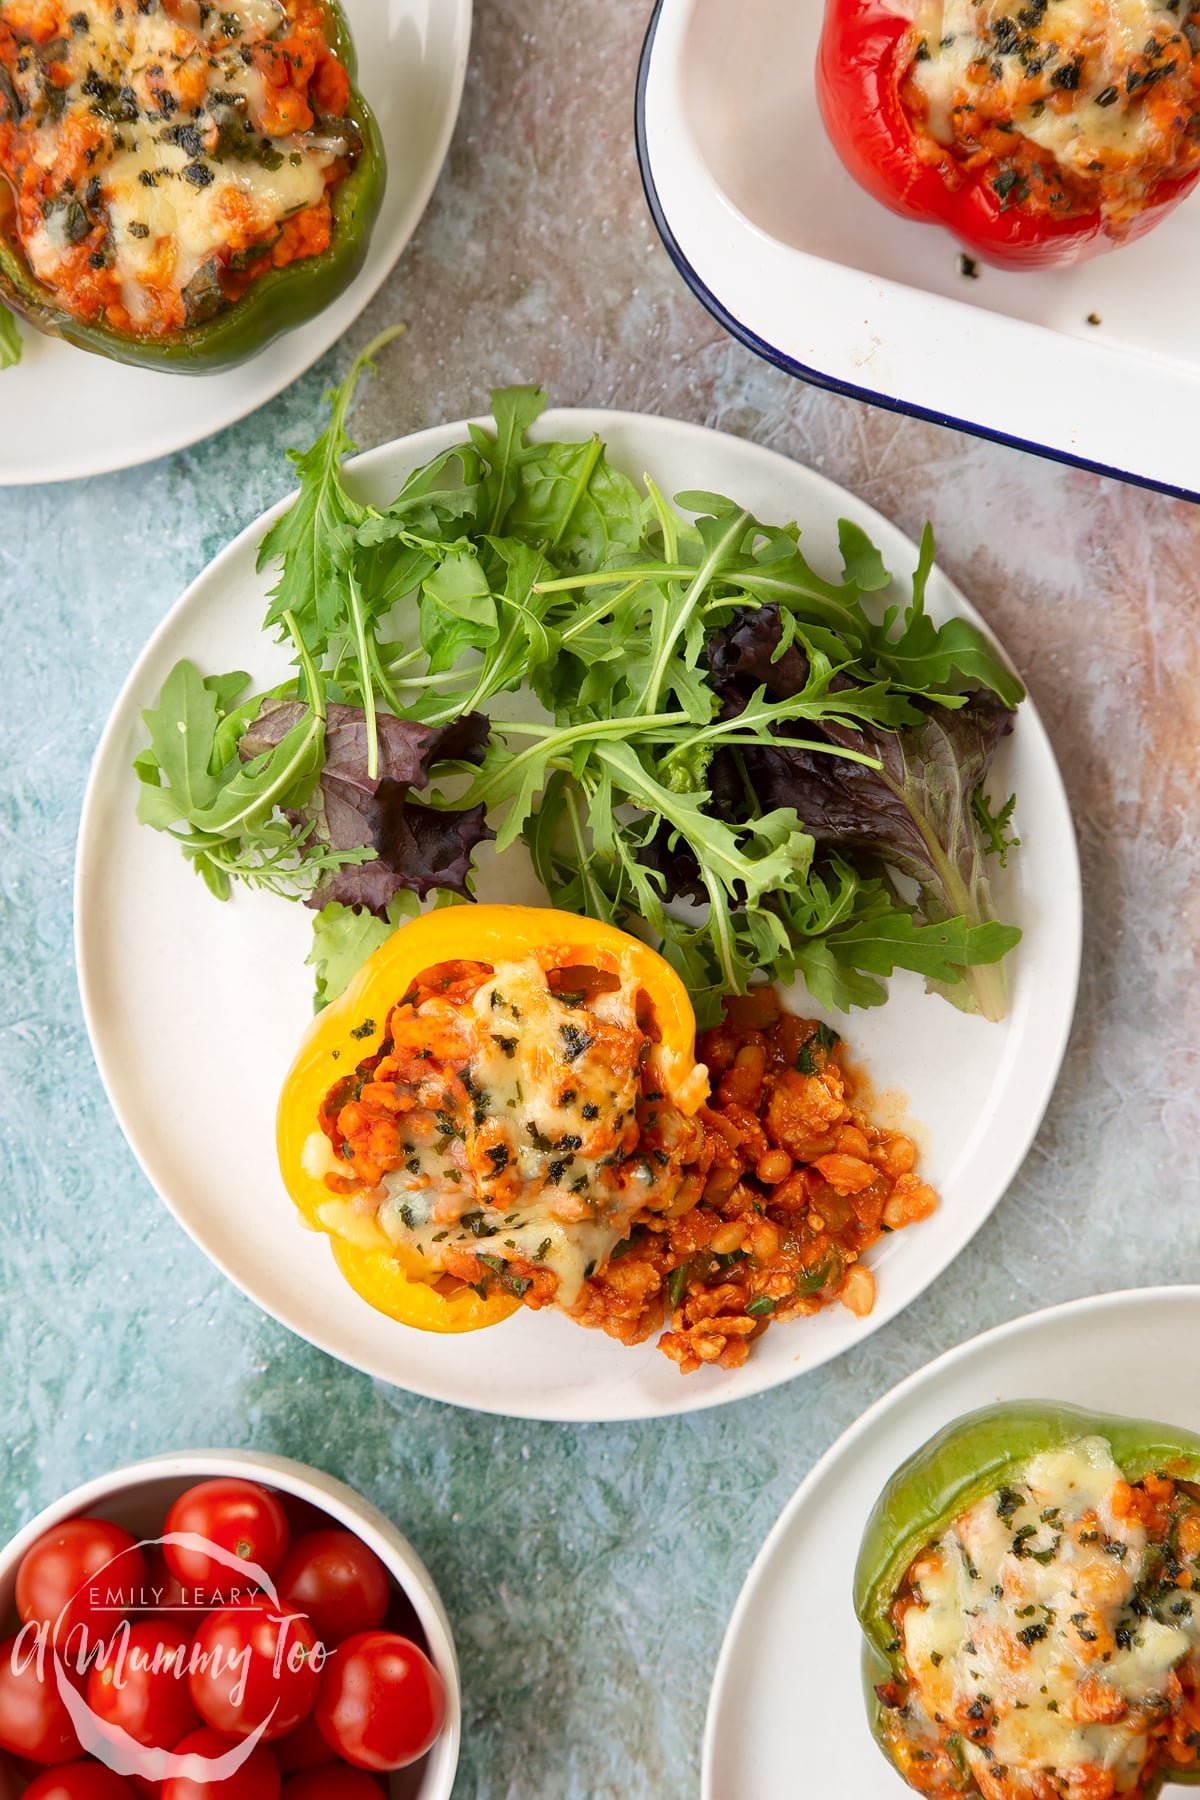 A yellow pepper stuffed with turkey mince, vegetables and baked beans with melted cheese on top. The filling spills onto the white plate. More baked bean stuffed peppers are shown to the edge of frame.